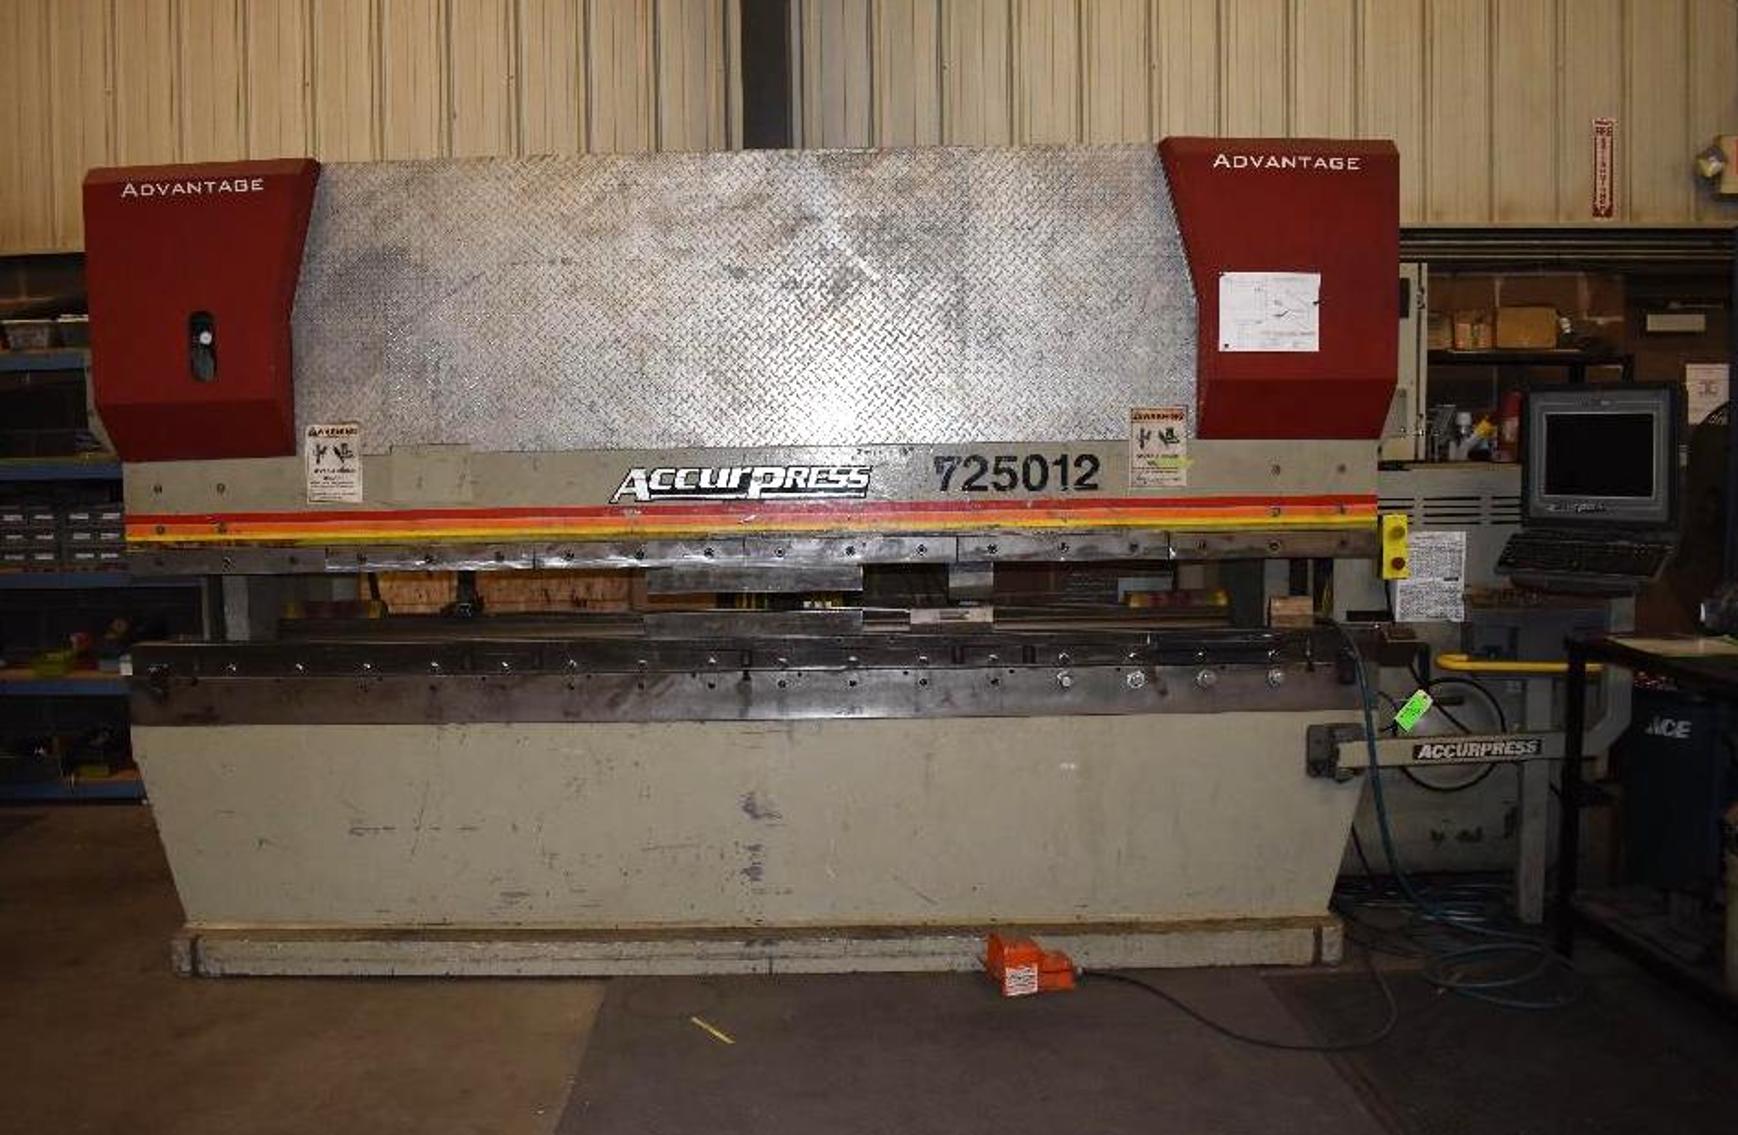 Complete Liquidation Micra Enterprise: CNC, Laser Cutters, Fabrication and Welding Equipment